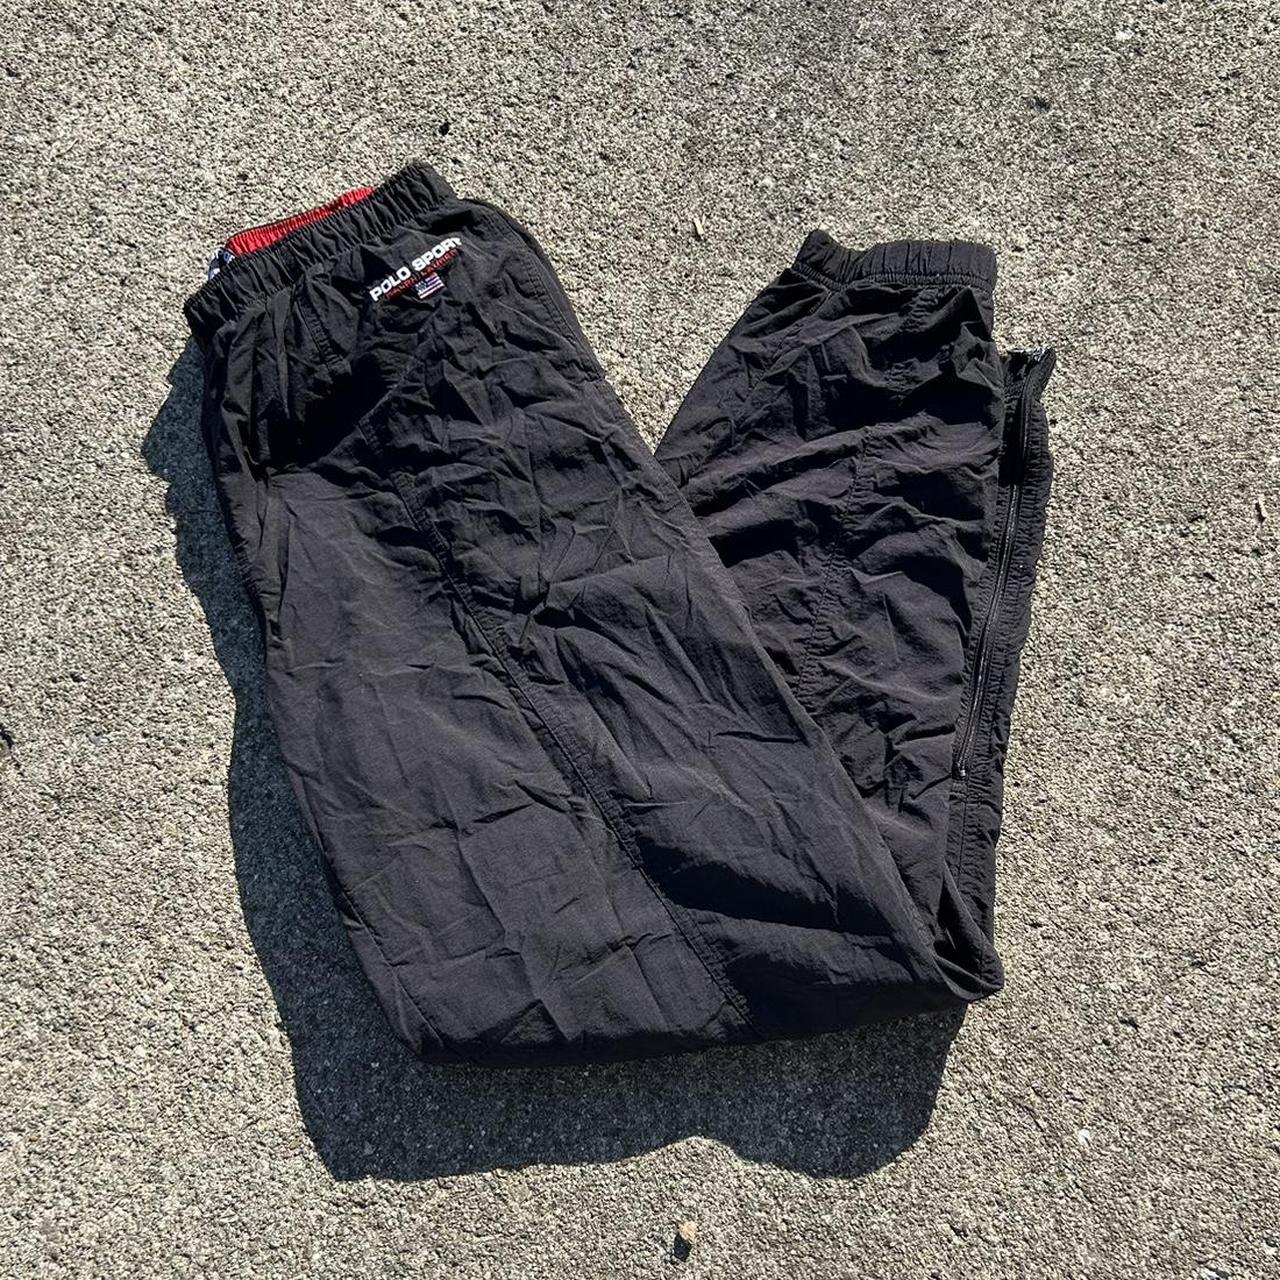 Orvis classic collection womens black athletic pants - Depop